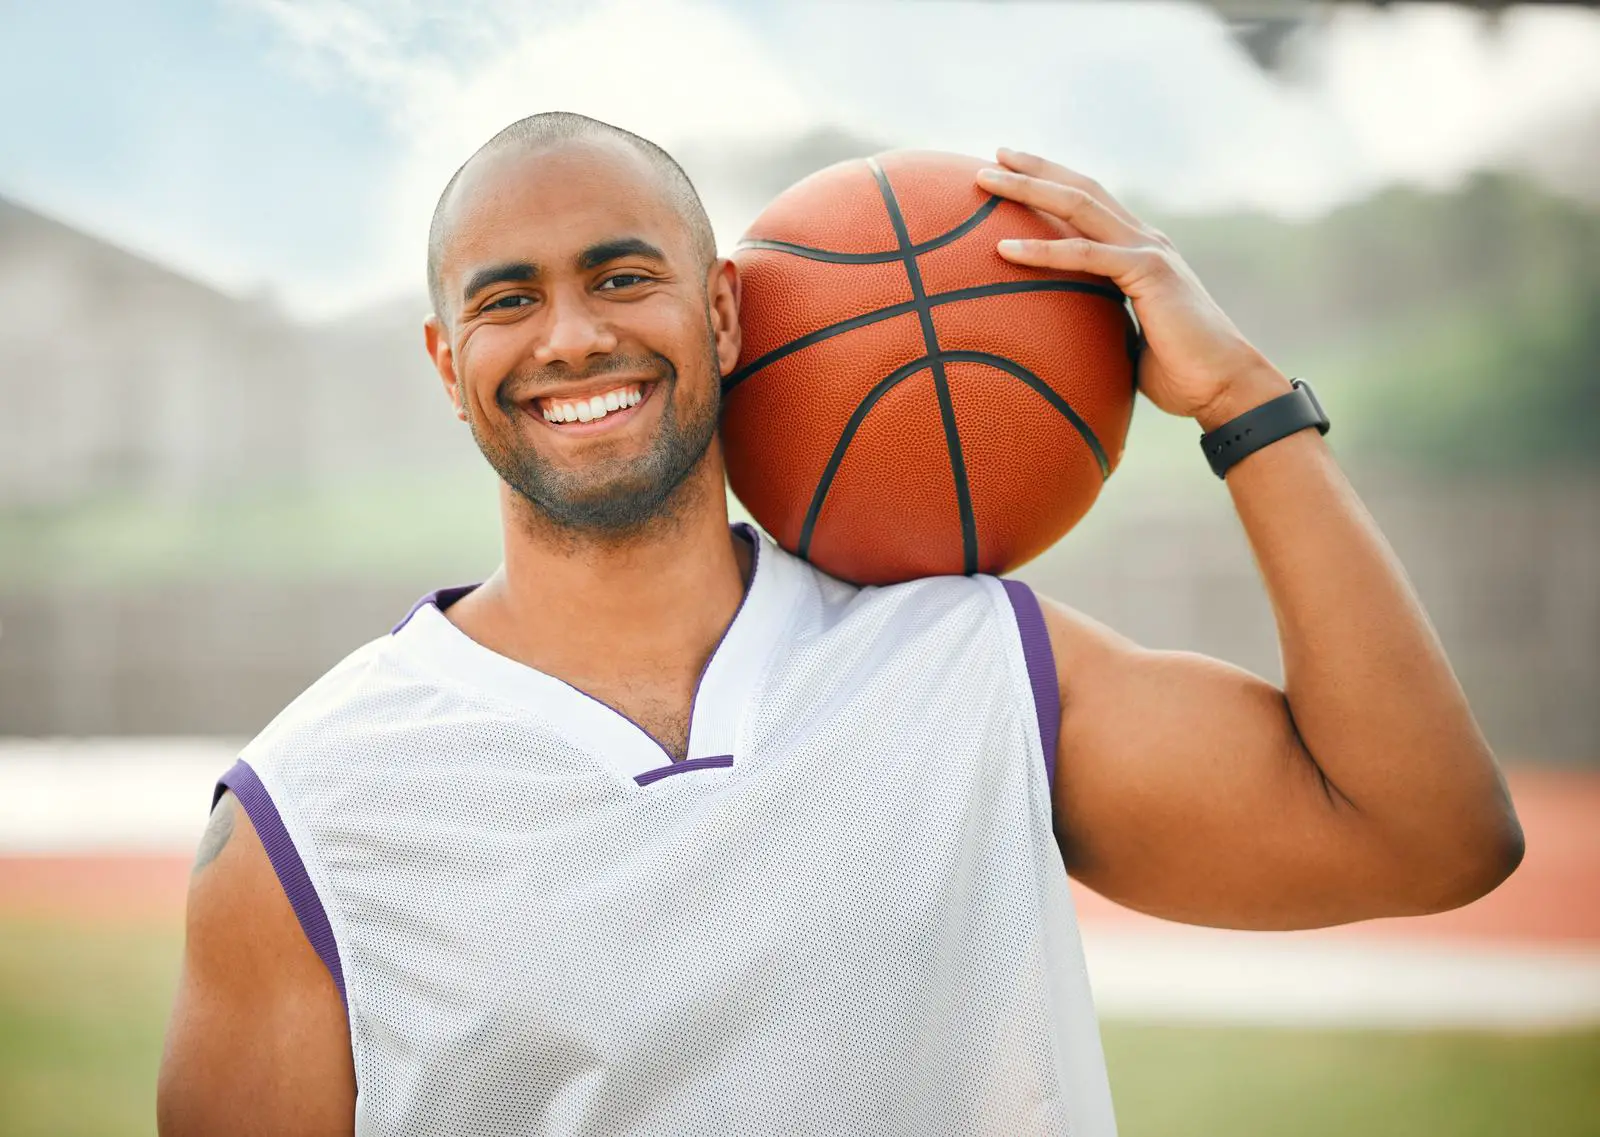 How To Increase Stamina For Basketball